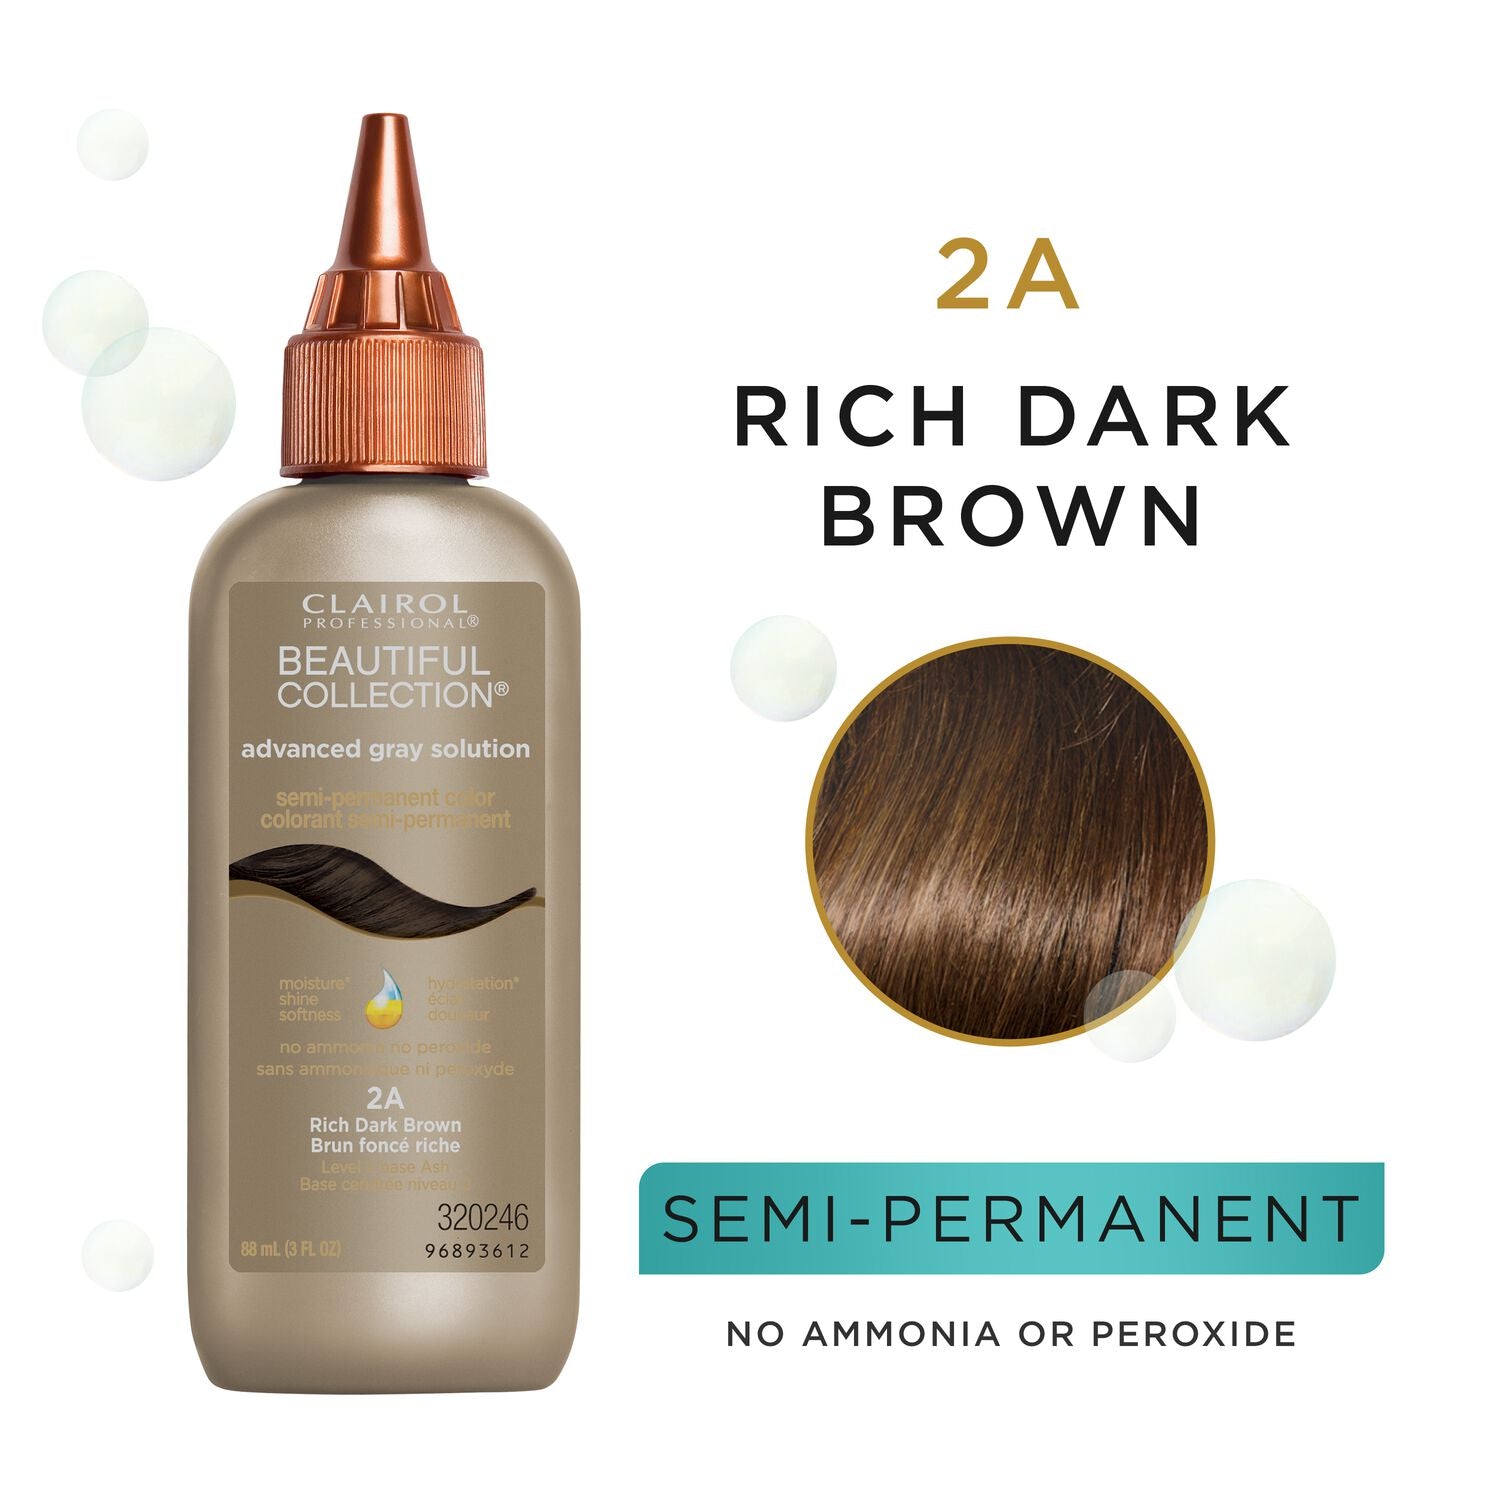 Beautiful Collection  by   Clairol Professional Clairol Beautiful Collection Advanced Gray Solution Semi-permanent Color Rich Dark Brown